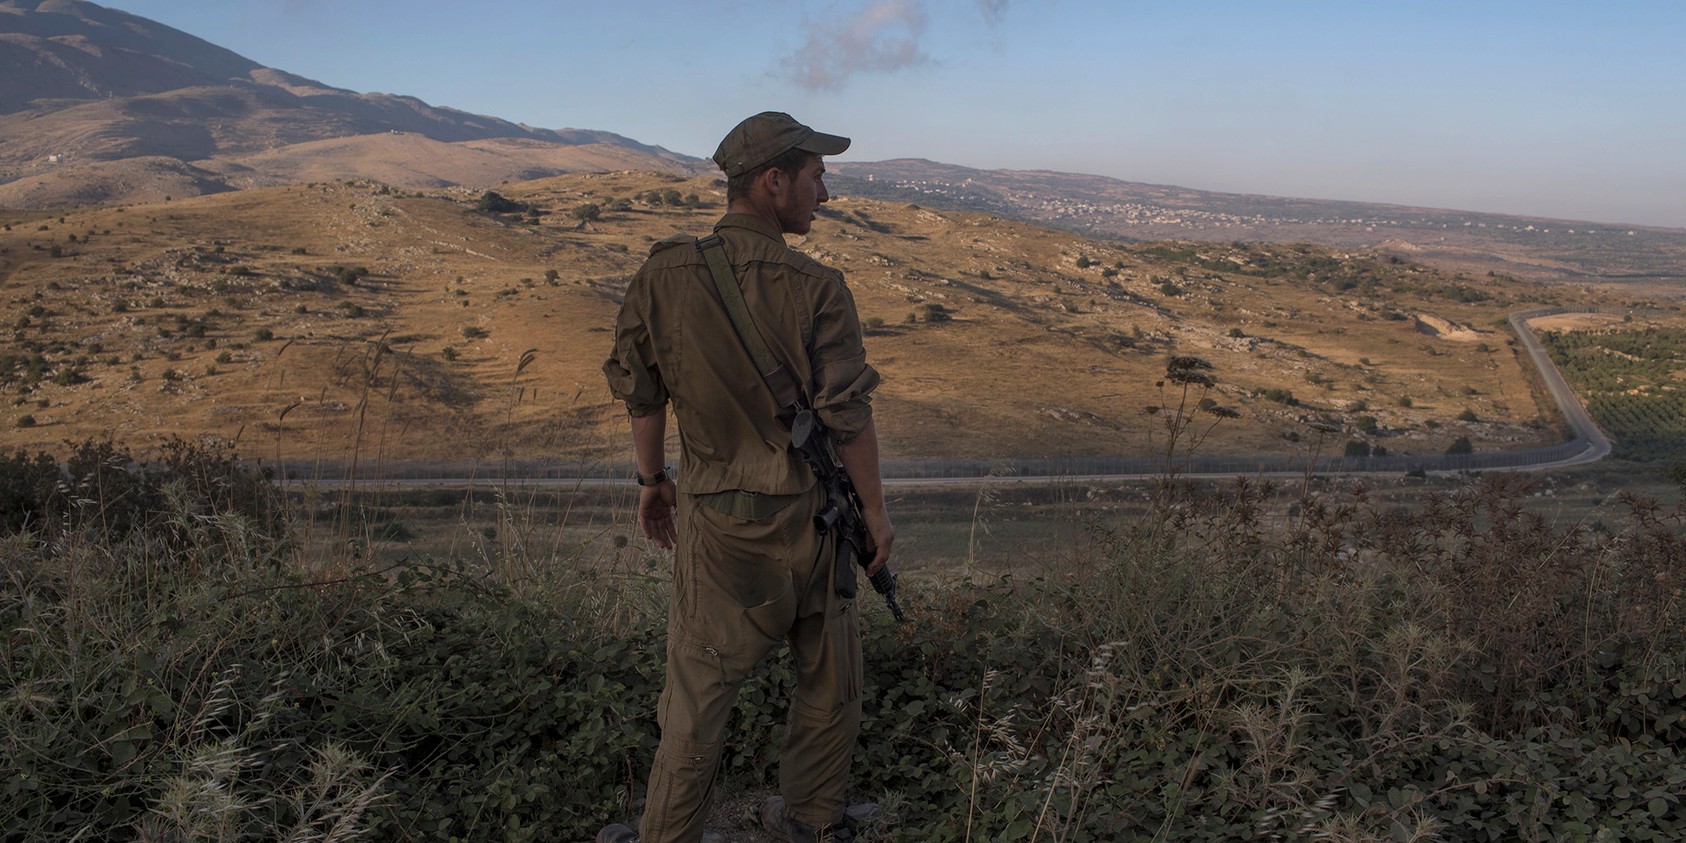 An Israeli soldier stands near the border with Syria near the village of Hadar, in the Israeli-annexed Golan Heights, June 21, 2015. (Uriel Sinai/The New York Times)